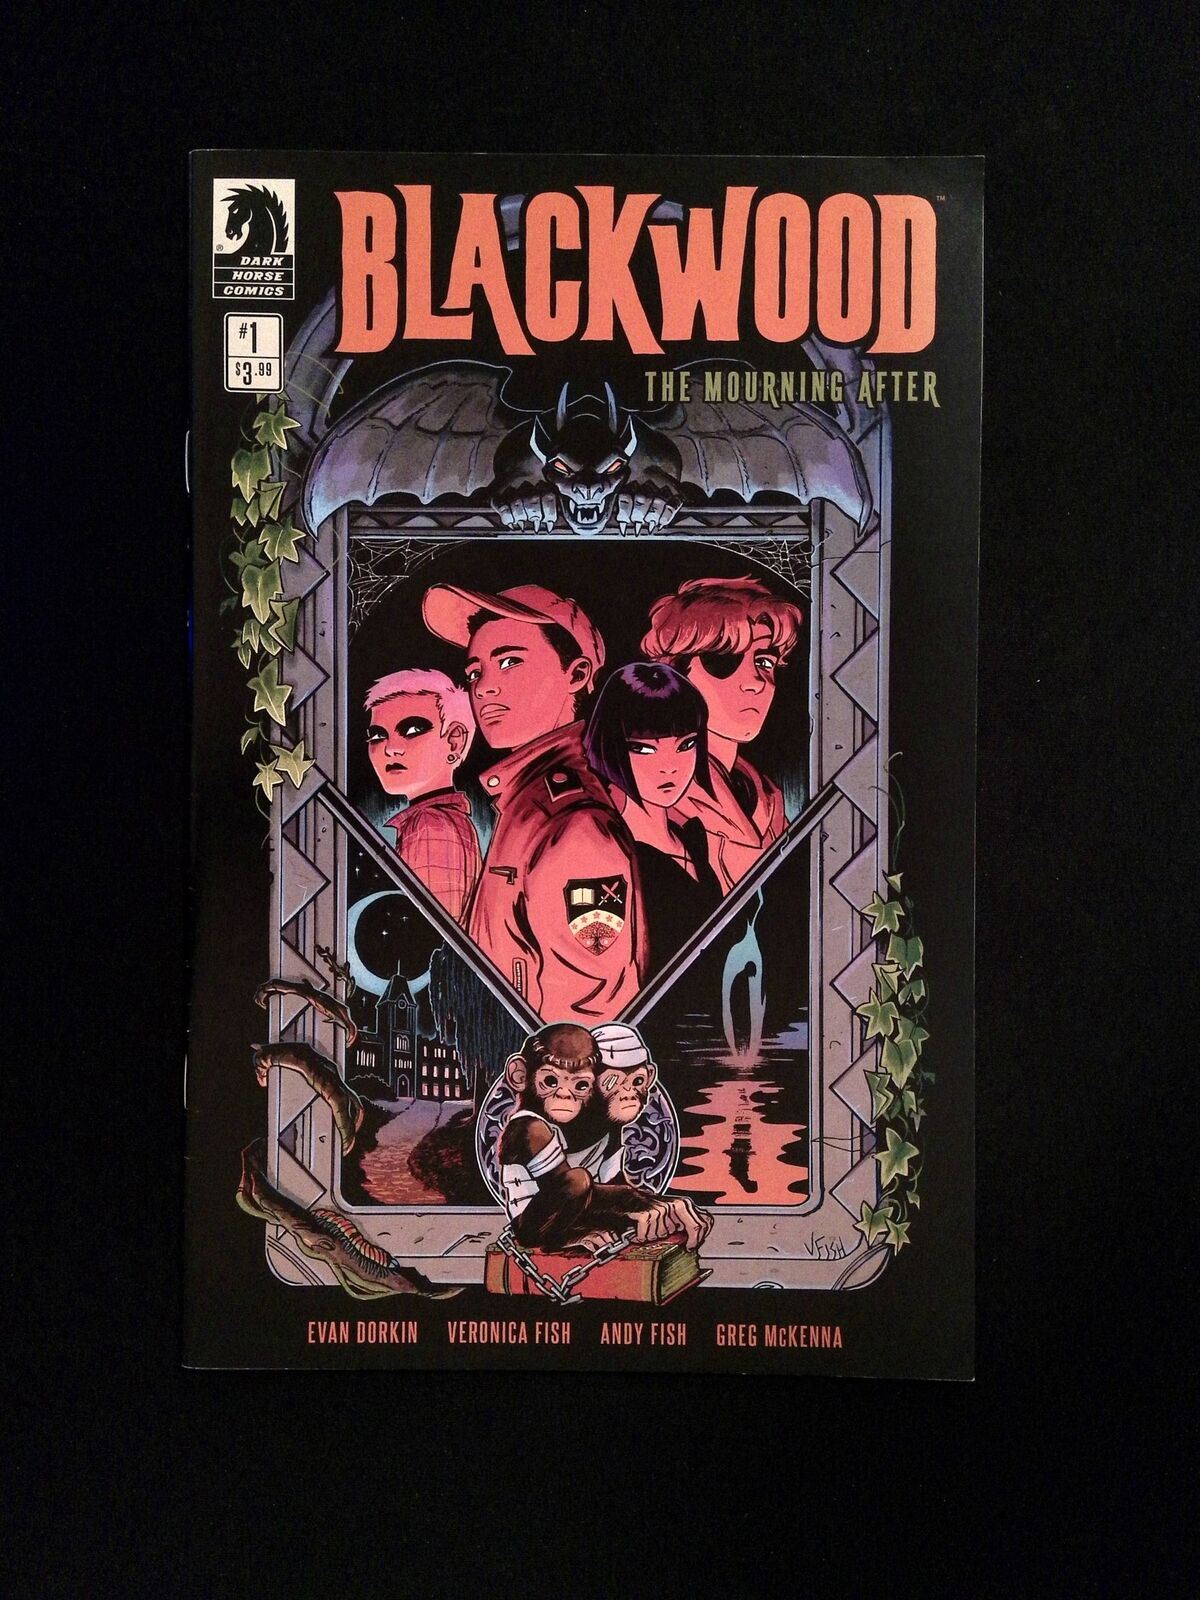 Blackwood The Mourning After #1  DARK HORSE Comics 2020 VF+